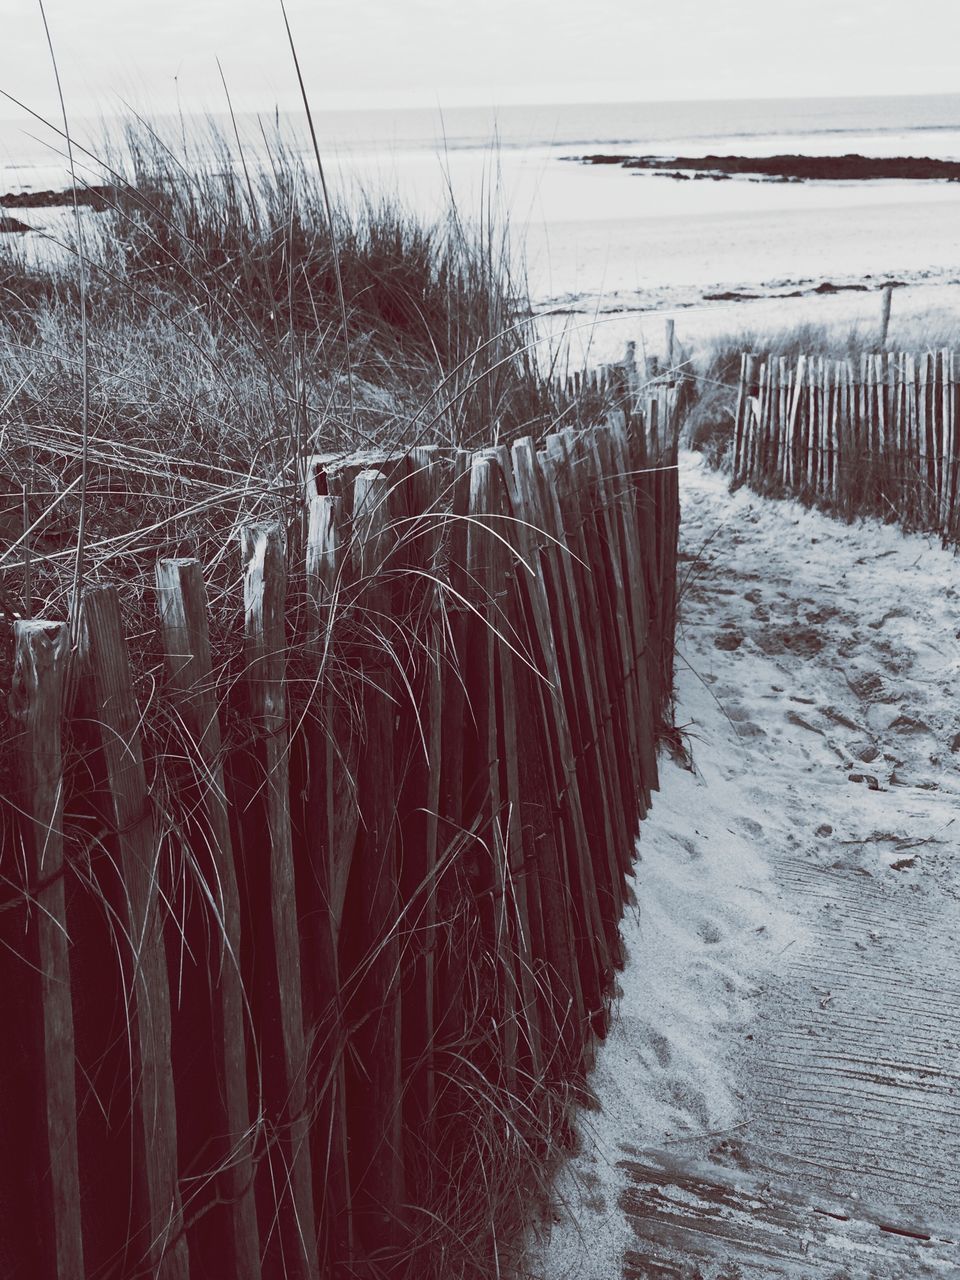 cold temperature, winter, water, snow, weather, nature, season, frozen, wet, sky, tranquility, beach, field, fence, no people, day, outdoors, tranquil scene, plant, beauty in nature